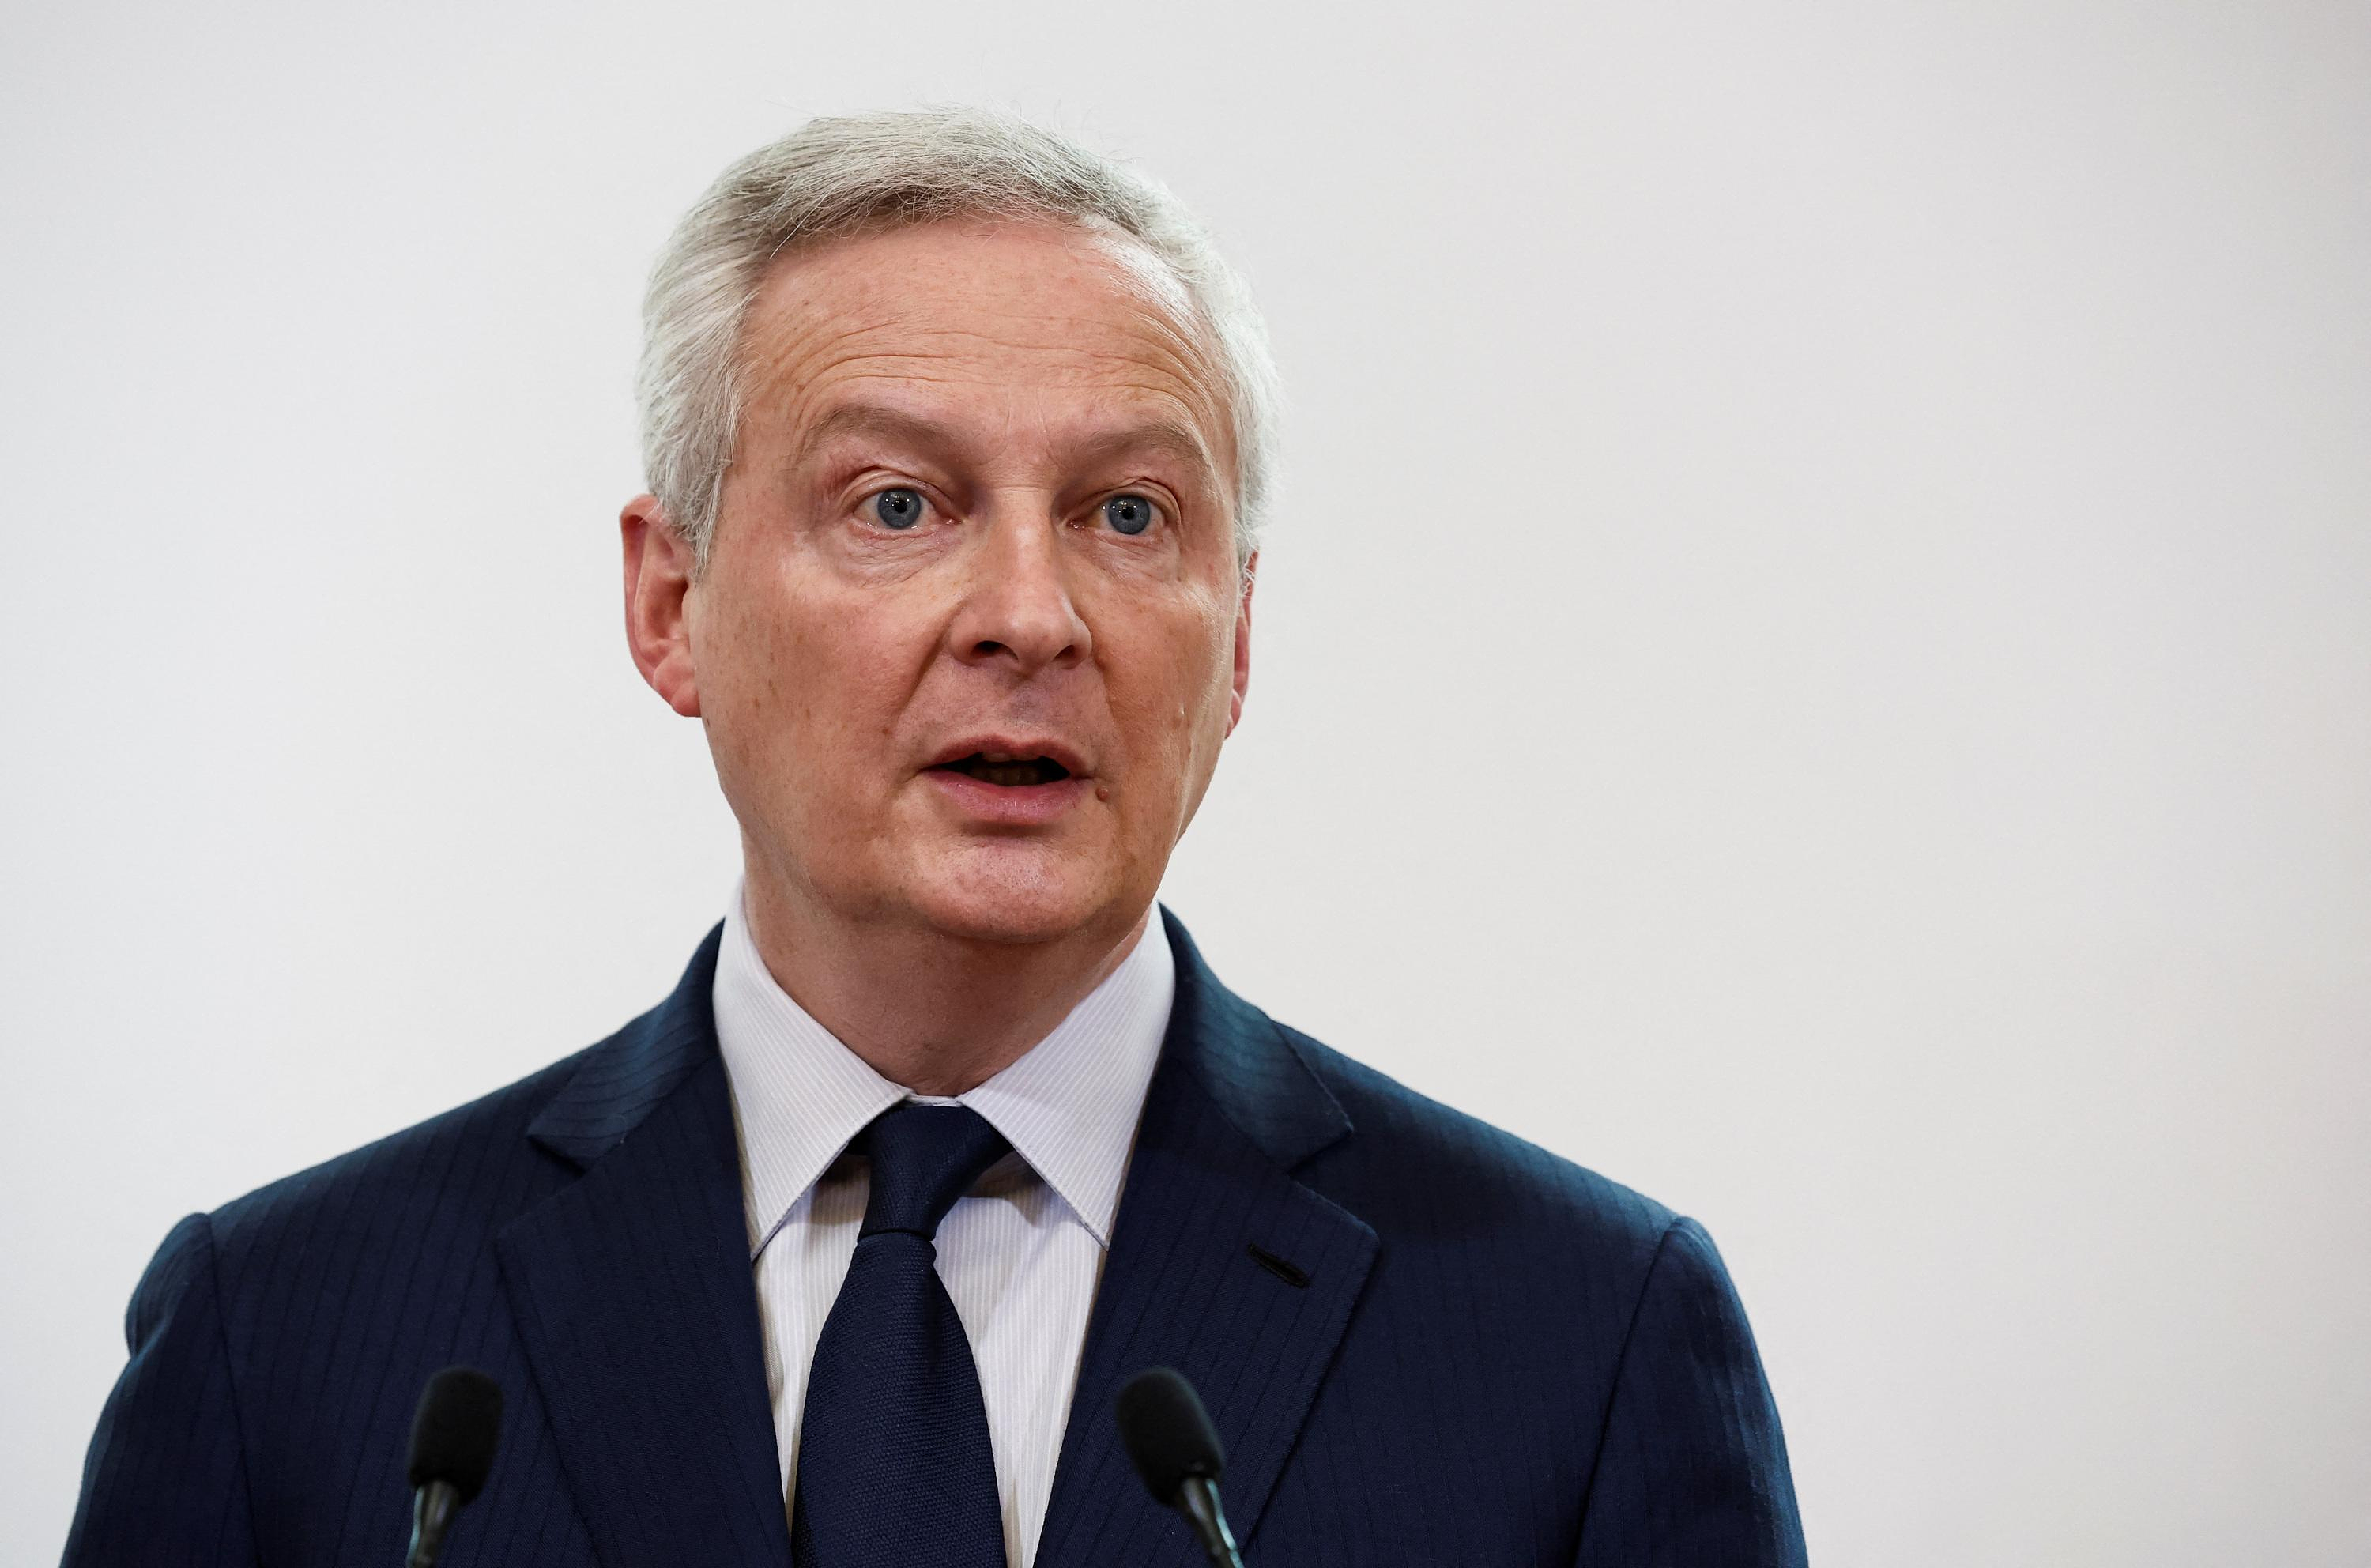 Egalim Law: “All major supermarket chains controlled in the coming days”, announces Le Maire